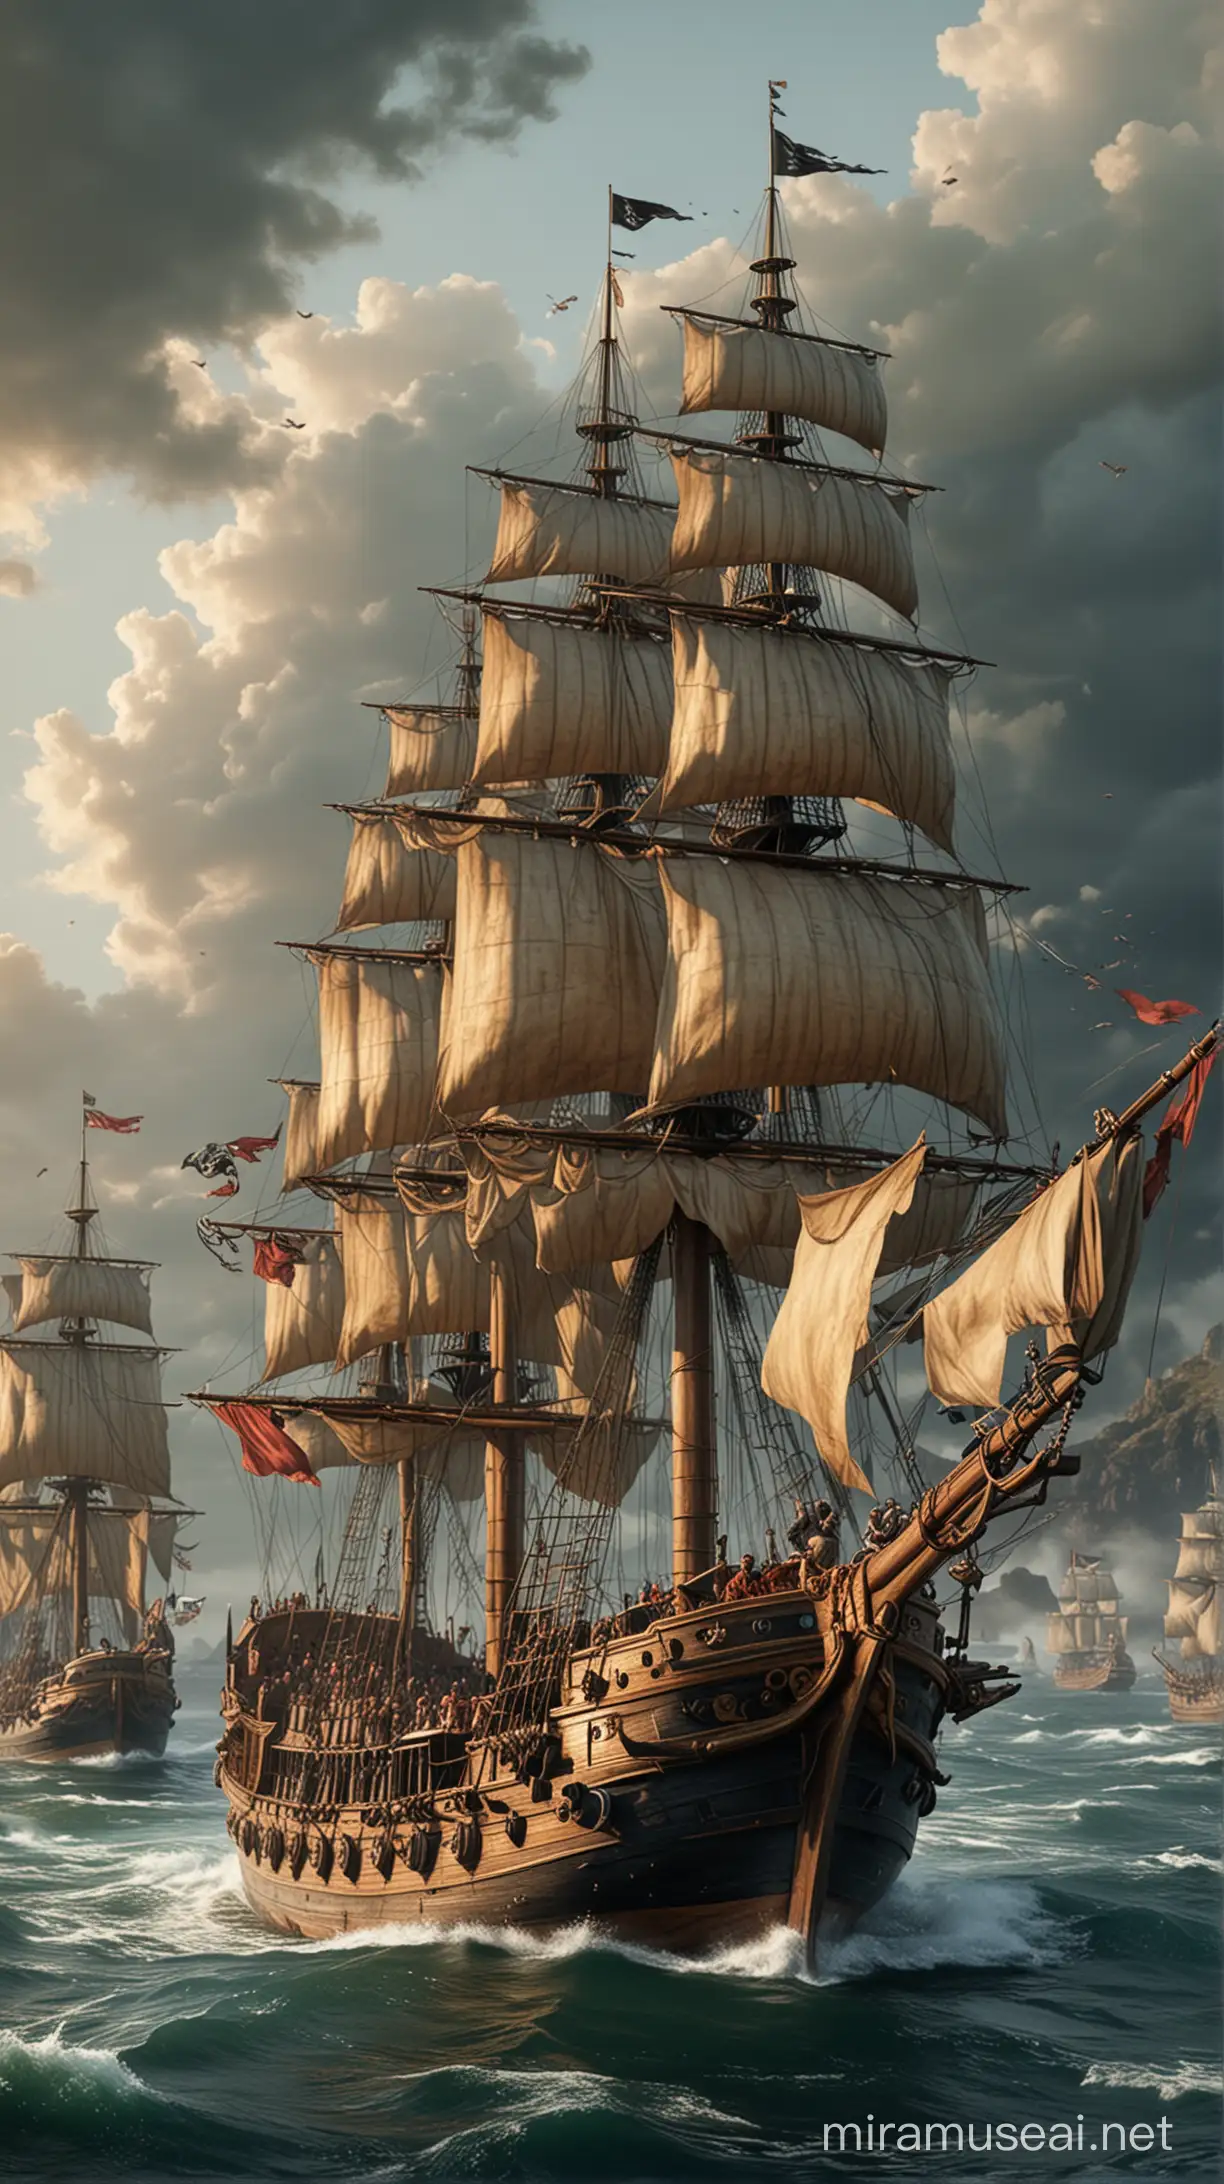 Caesars Ransom Paid and Naval Confrontation with Pirates Hyper Realistic Depiction